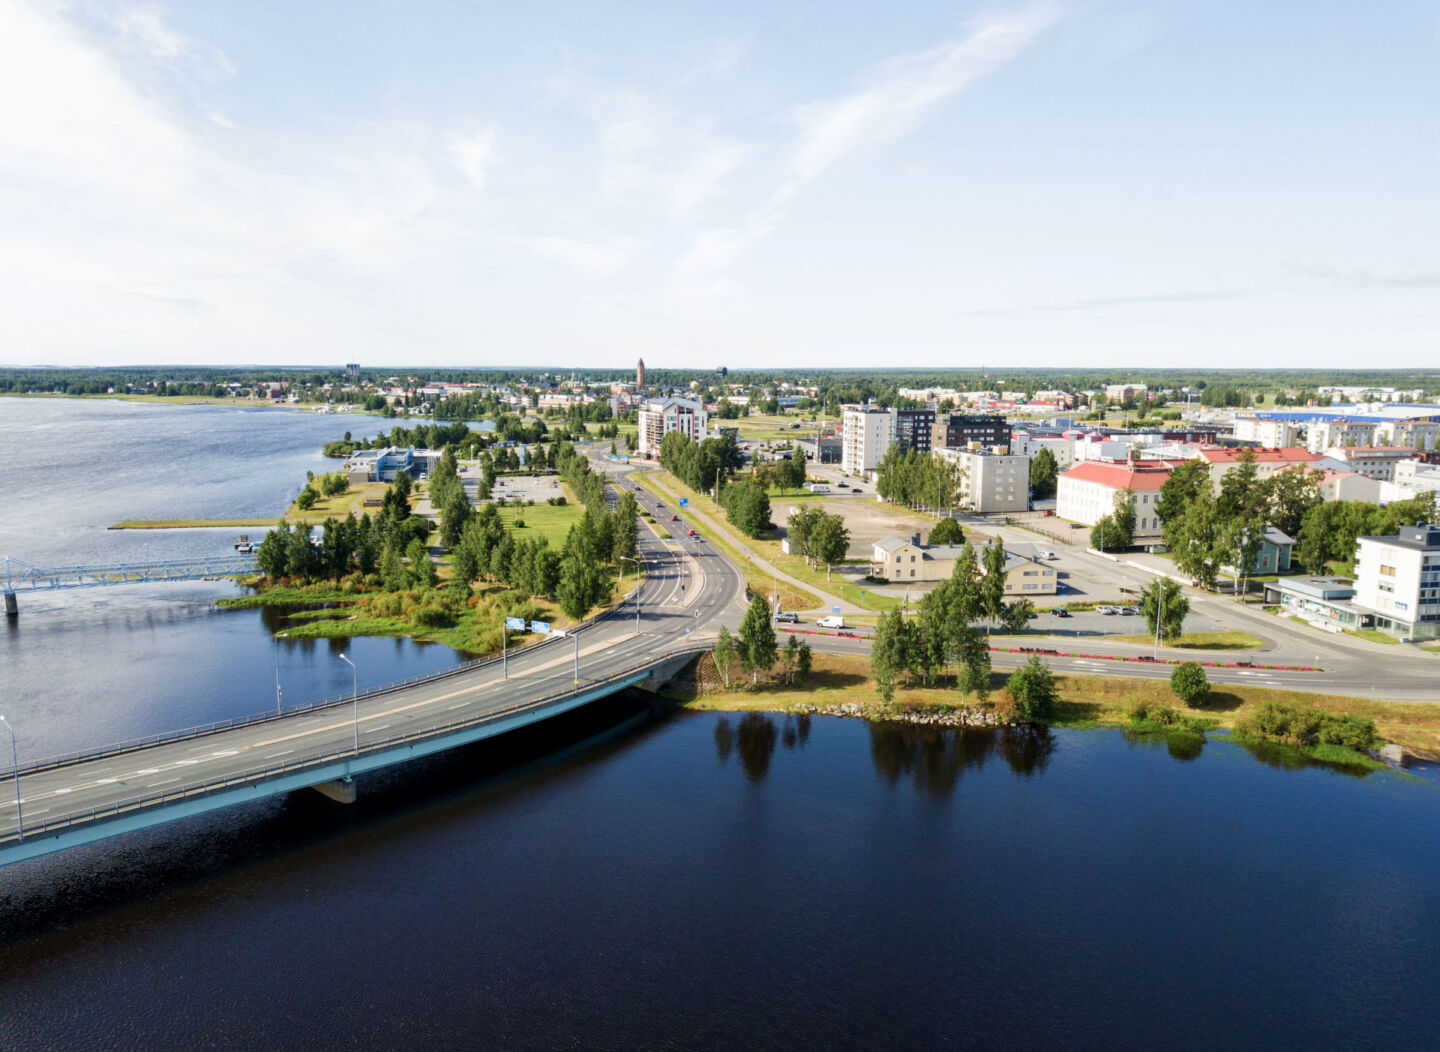 Aerial view of Tornio, one of the twin cities on the border between Finnish & Swedish Lapland